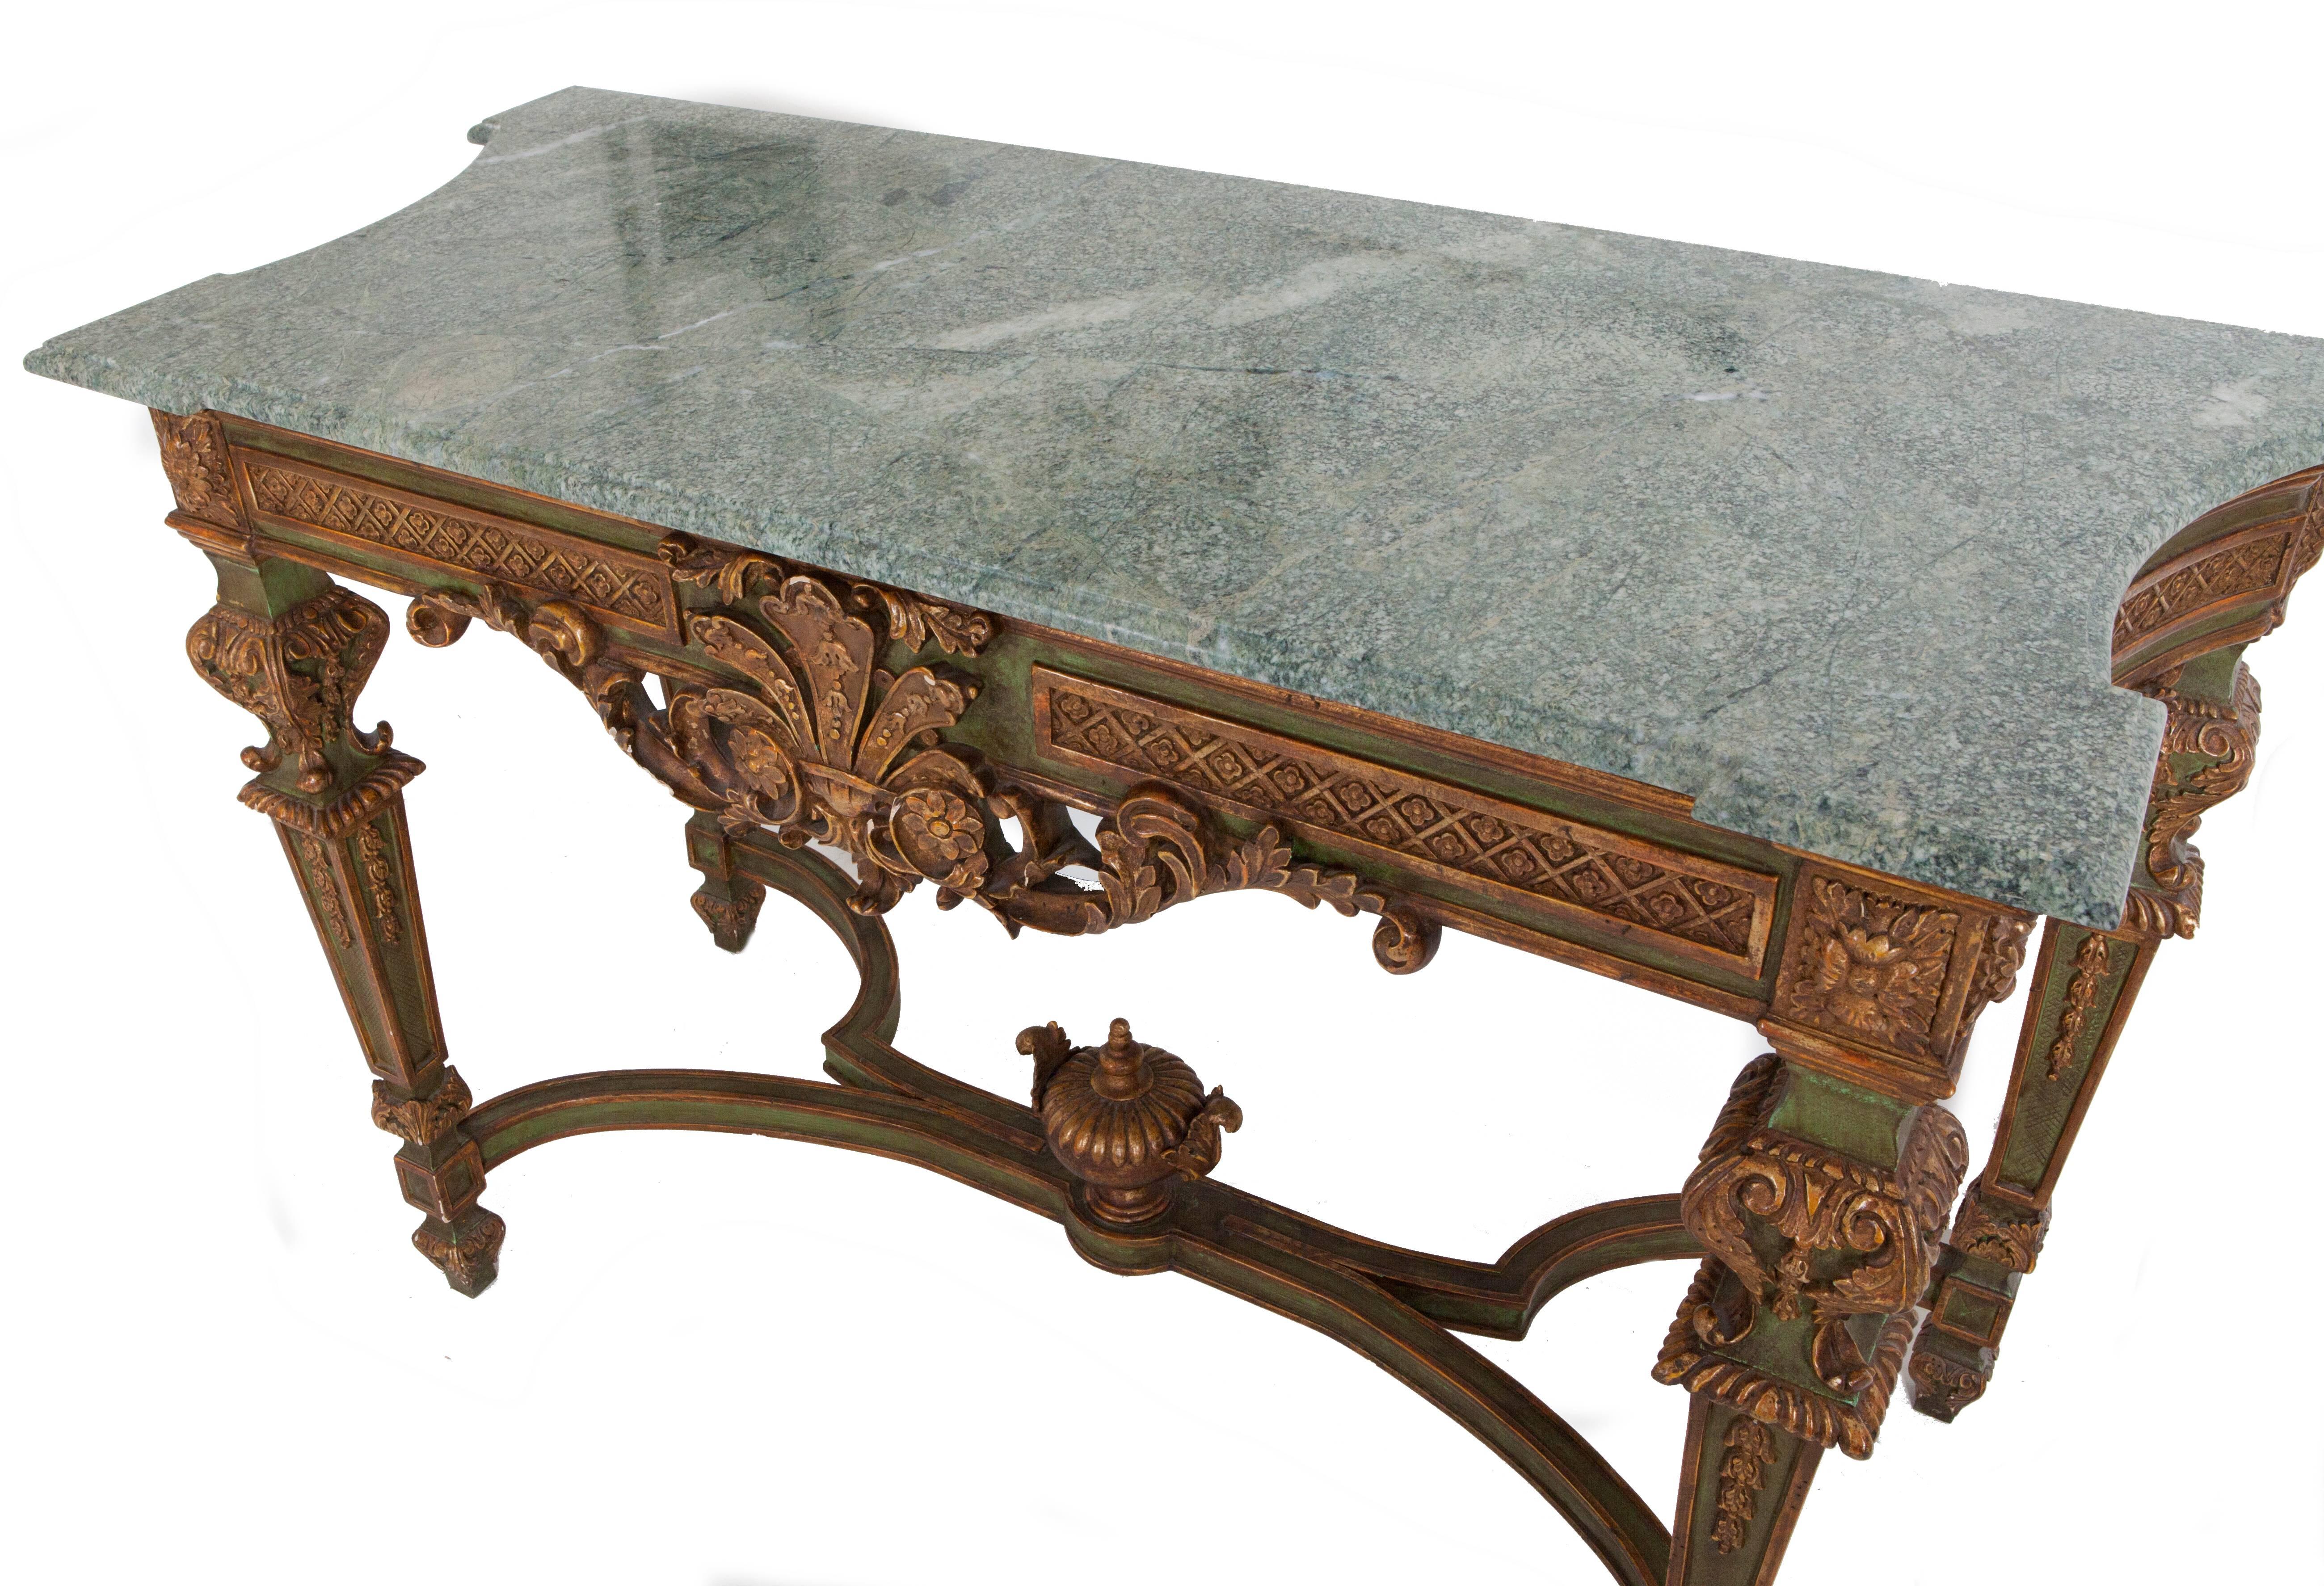 20th century French hand-painted and gilt empire style Verde marble topped console table. Significantly hand-carved with fleur-de-lis, swags and urns